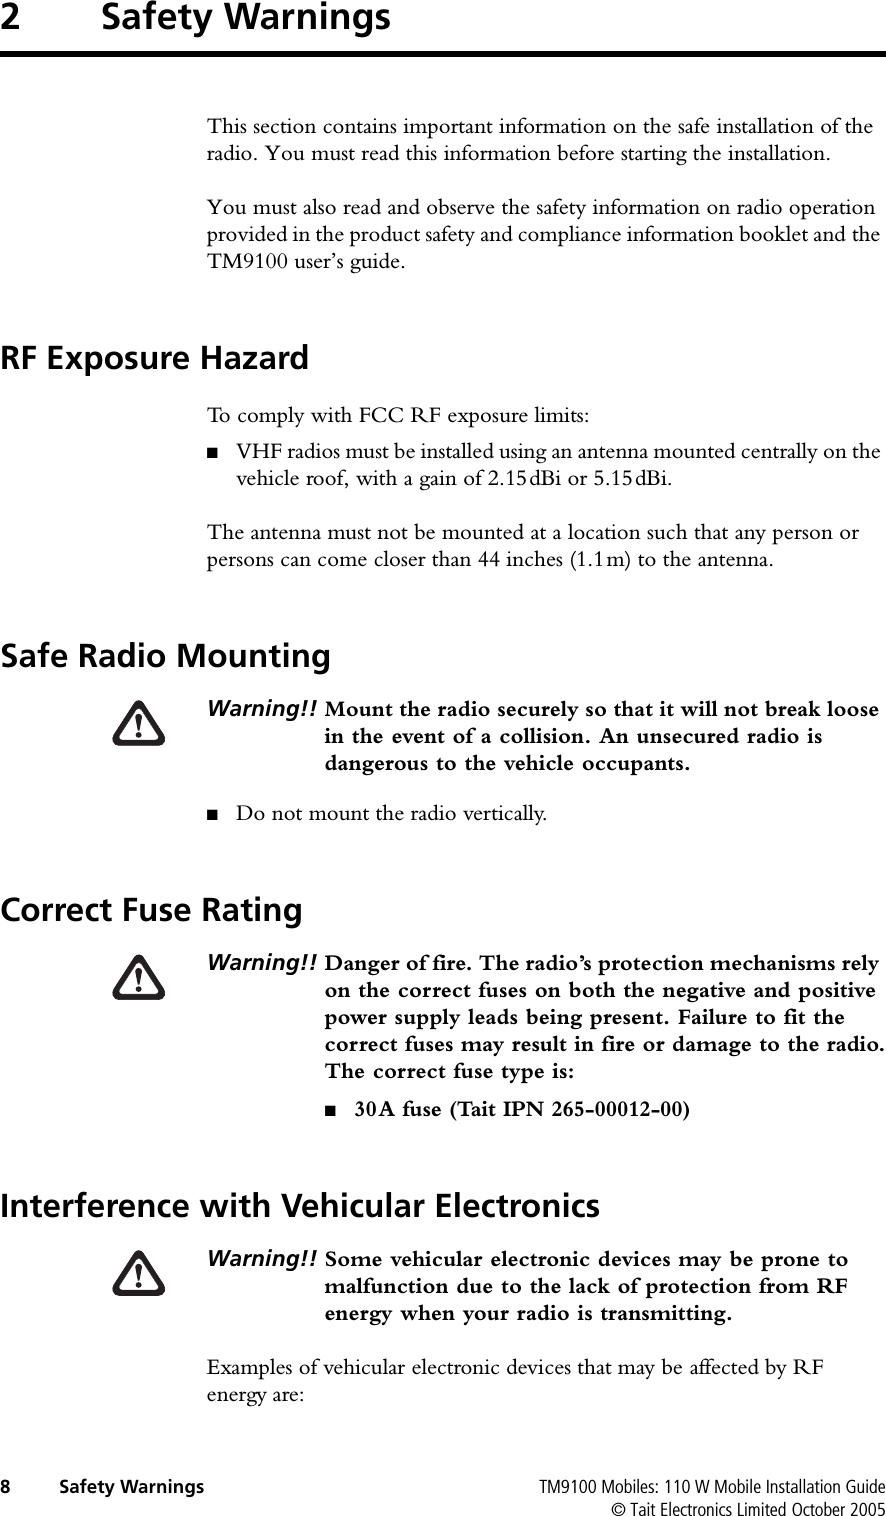  8 Safety Warnings TM9100 Mobiles: 110 W Mobile Installation Guide© Tait Electronics Limited October 20052 Safety WarningsThis section contains important information on the safe installation of the radio. You must read this information before starting the installation.You must also read and observe the safety information on radio operation provided in the product safety and compliance information booklet and the TM9100 user’s guide.RF Exposure HazardTo comply with FCC RF exposure limits:■VHF radios must be installed using an antenna mounted centrally on the vehicle roof, with a gain of 2.15dBi or 5.15dBi.The antenna must not be mounted at a location such that any person or persons can come closer than 44 inches (1.1m) to the antenna.Safe Radio MountingWarning!! Mount the radio securely so that it will not break loose in the event of a collision. An unsecured radio is dangerous to the vehicle occupants.■Do not mount the radio vertically.Correct Fuse RatingWarning!! Danger of fire. The radio’s protection mechanisms rely on the correct fuses on both the negative and positive power supply leads being present. Failure to fit the correct fuses may result in fire or damage to the radio.The correct fuse type is:■30A fuse (Tait IPN 265-00012-00) Interference with Vehicular ElectronicsWarning!! Some vehicular electronic devices may be prone to malfunction due to the lack of protection from RF energy when your radio is transmitting.Examples of vehicular electronic devices that may be affected by RF energy are: